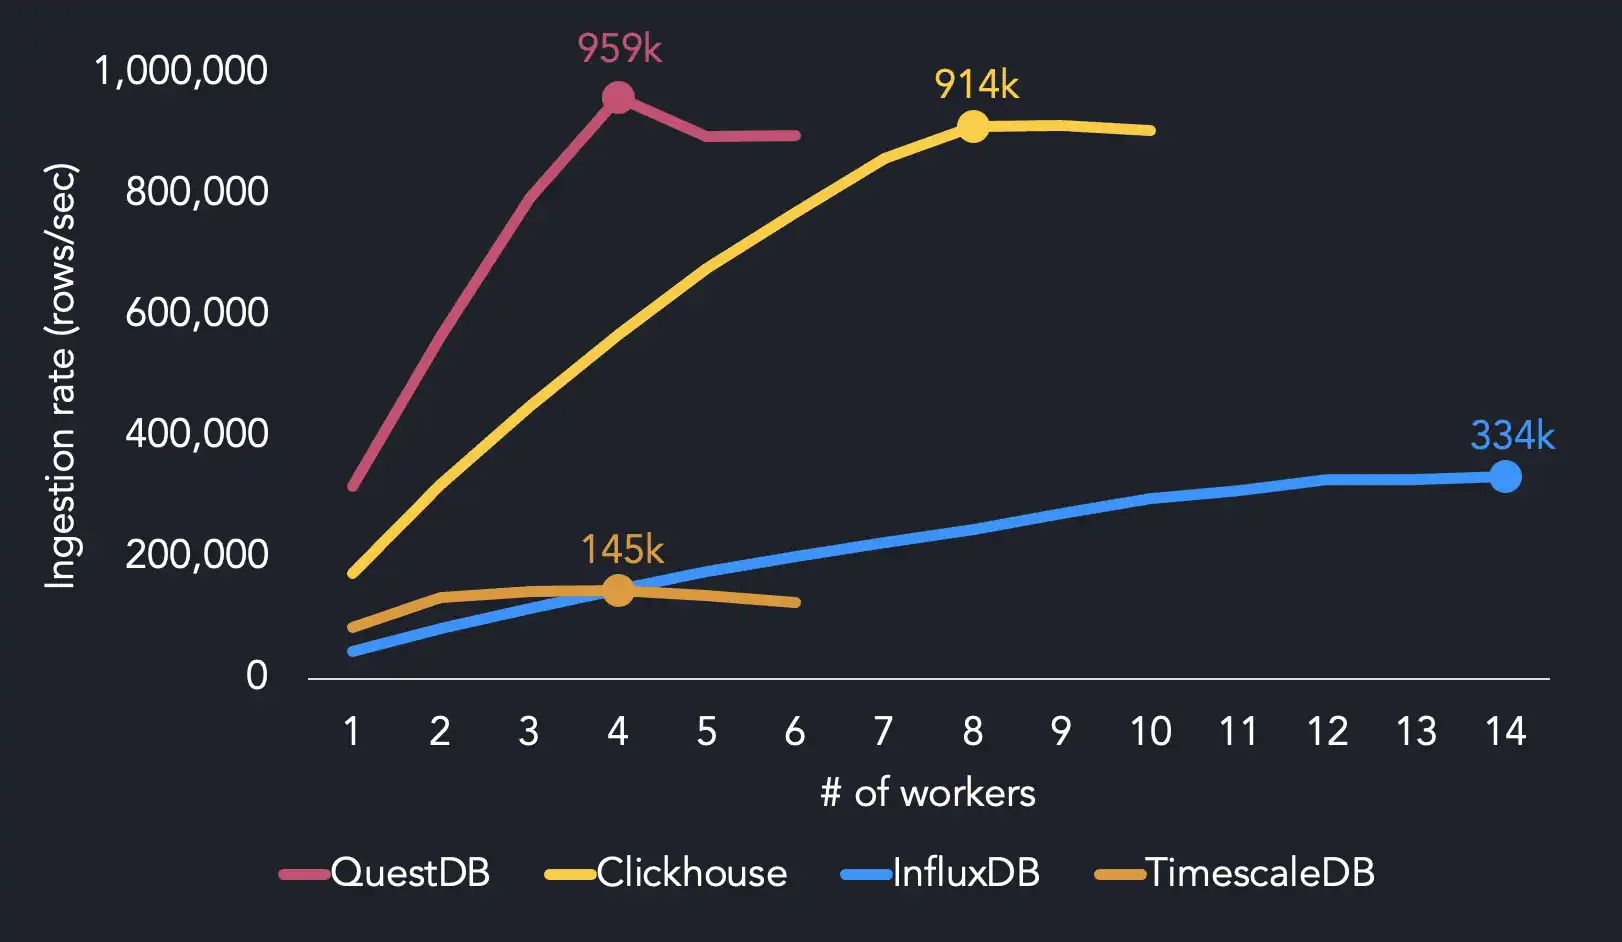 Time series benchmark suite results showing QuestDB outperforming ClickHouse, TimescaleDB and InfluxDB when using four workers